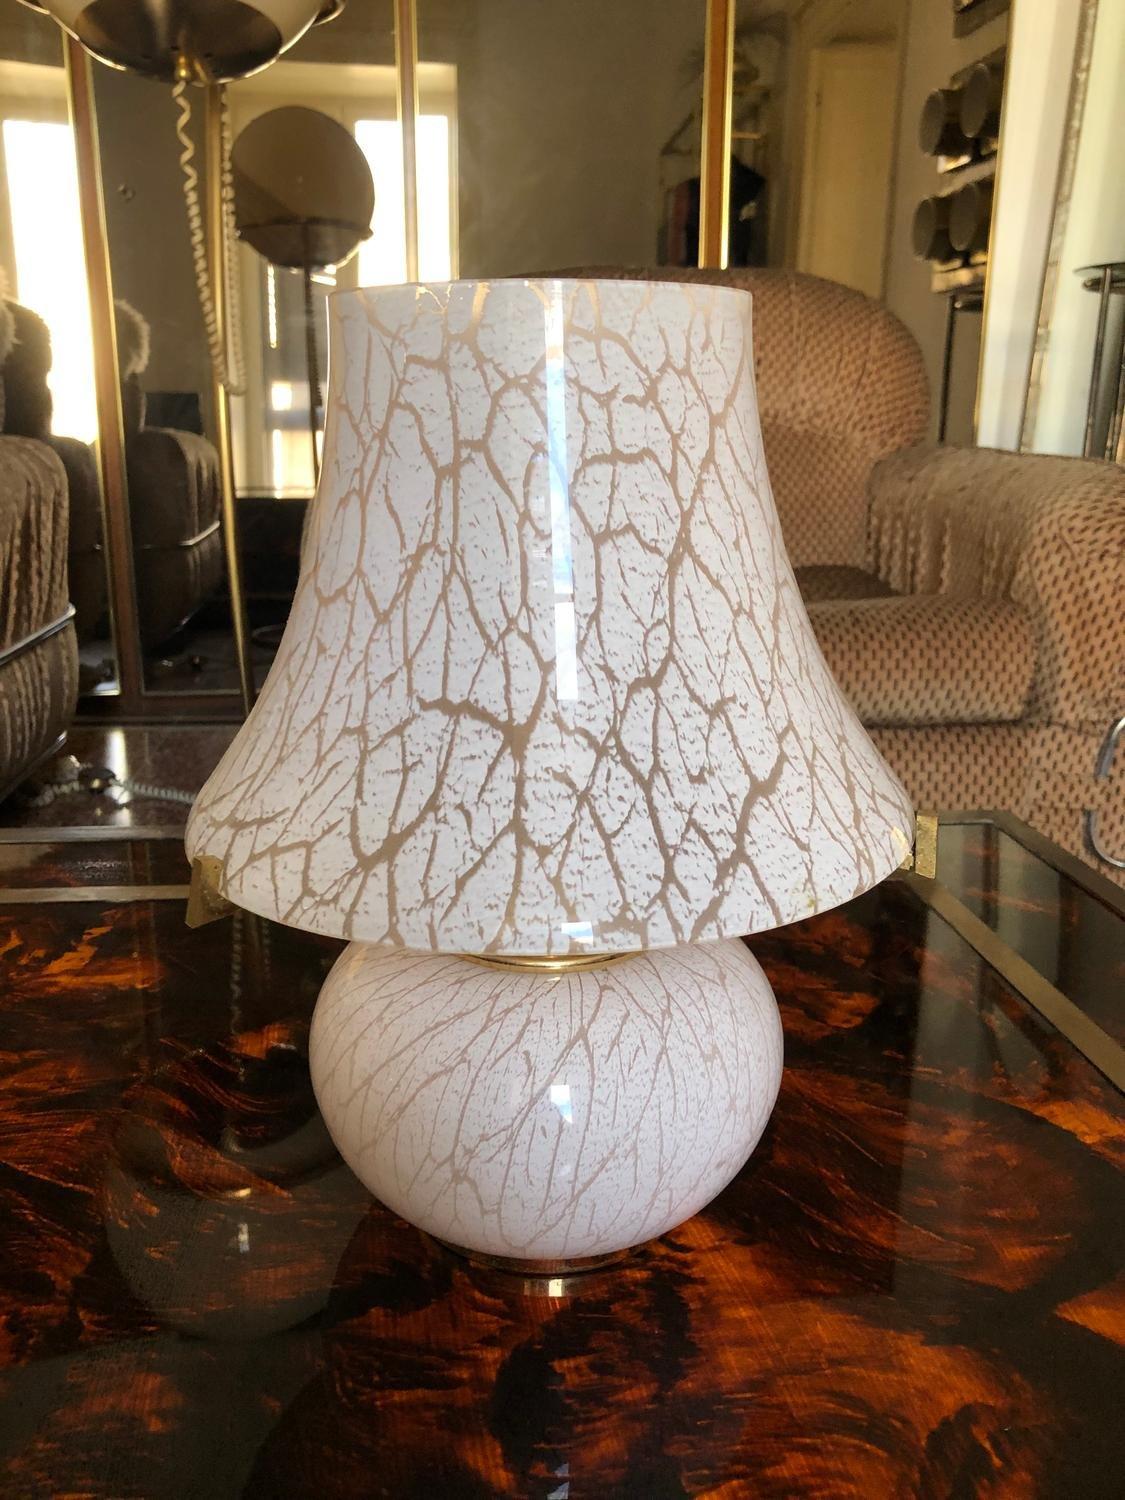 Murano glass mushroom table light. The glass is light pink with camouflage pattern. A beautiful brass stand holds up the lampshade.
Details
Creator: Murano
Dimensions: Height: 32cm Diameter: 26cm
Materials and Techniques: Glass and brass
Place of